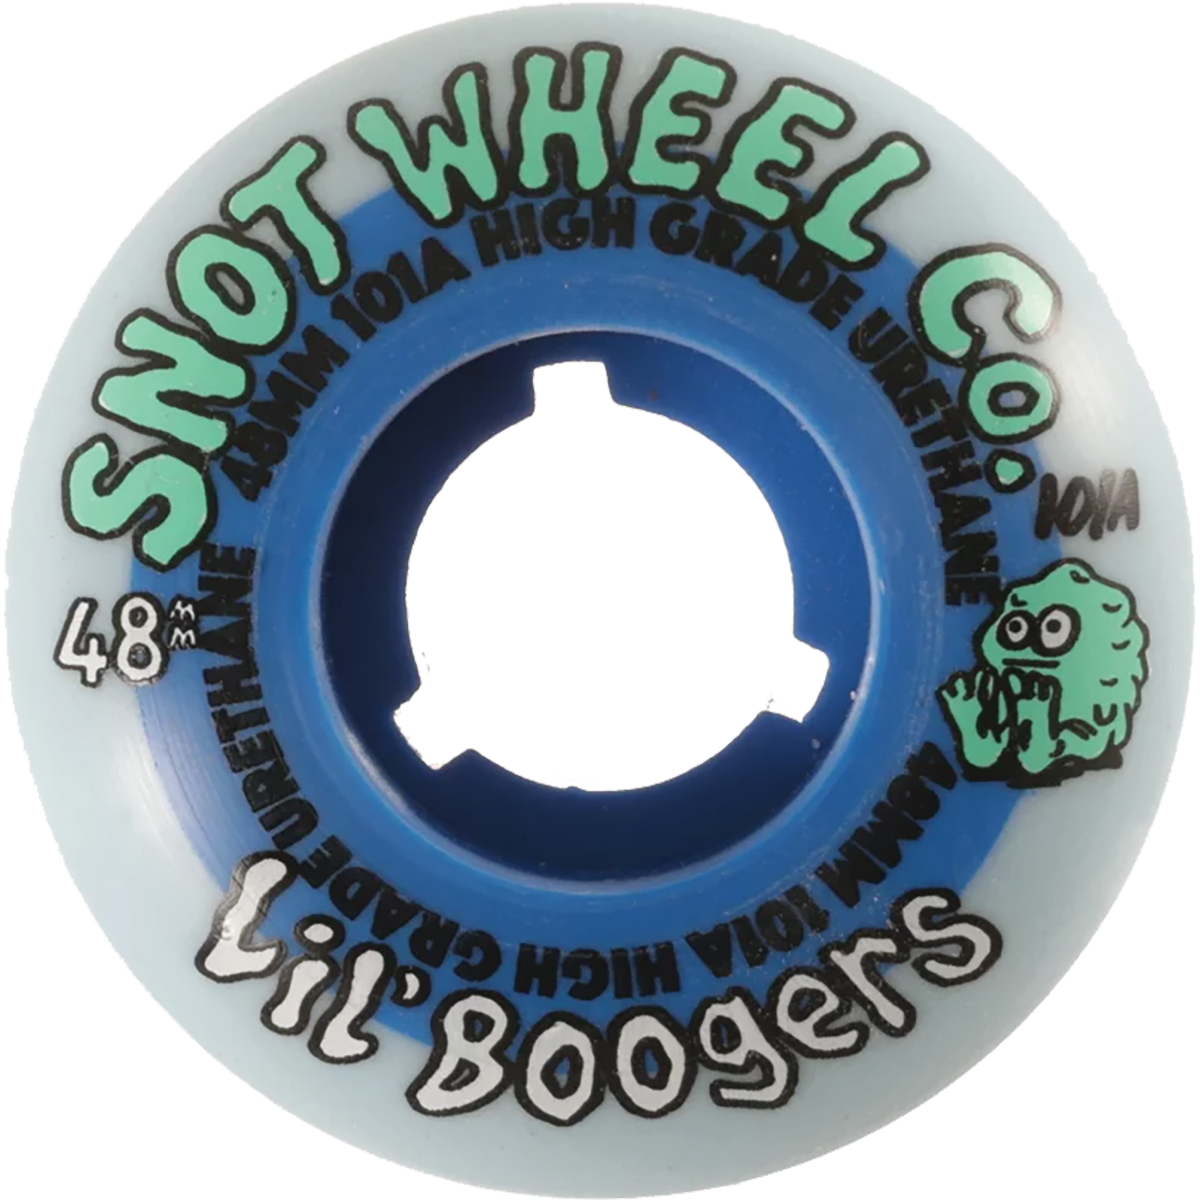 Snot LIL Boogers 48MM 101A WHT/BLUE - Invisible Board Shop